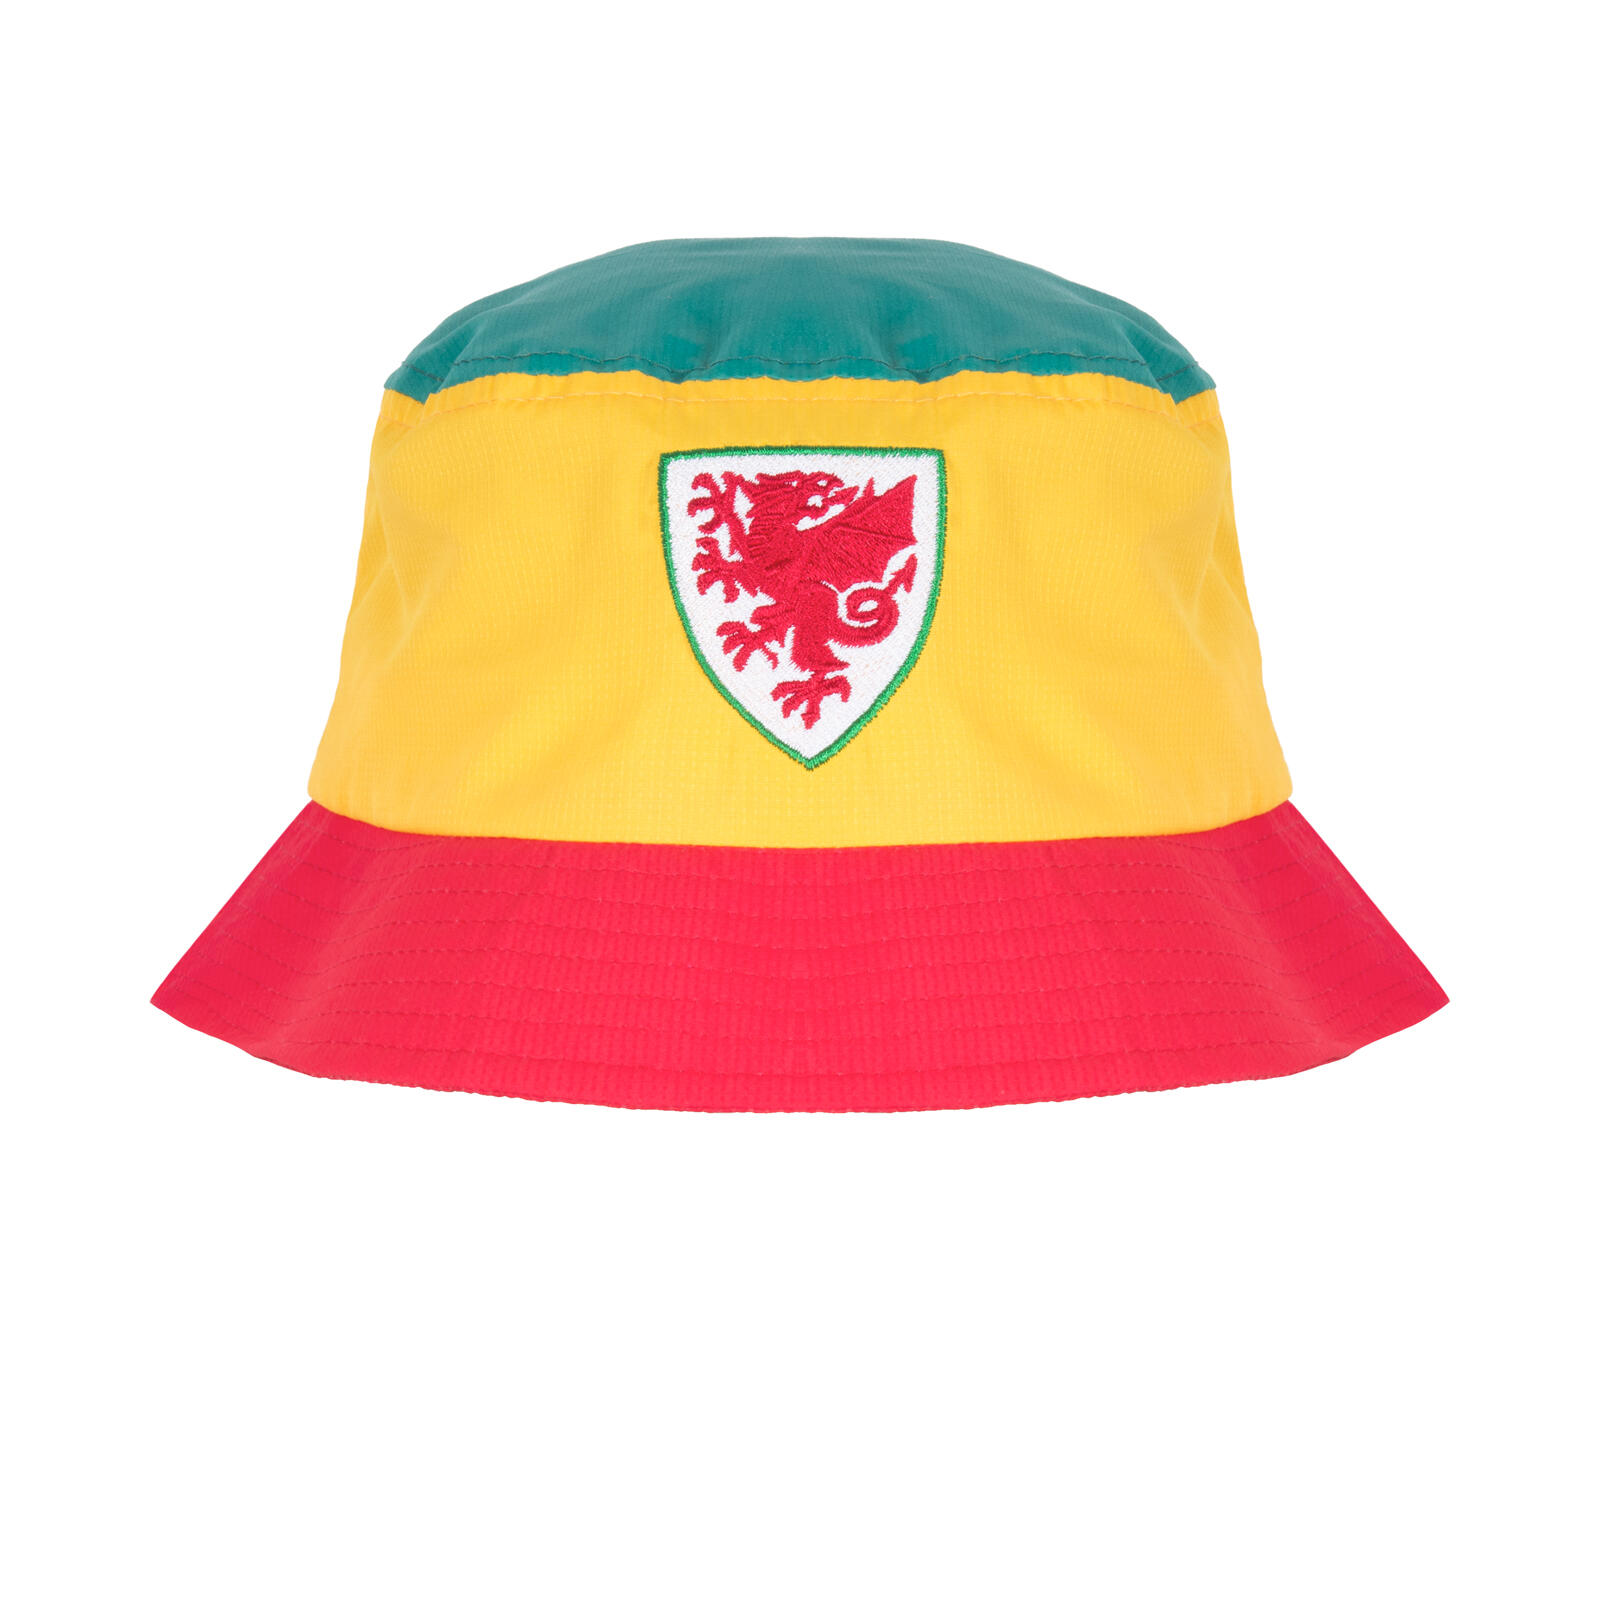 FA WALES FA Wales Bucket Hat FAW Official Football Gift Red Yellow Green